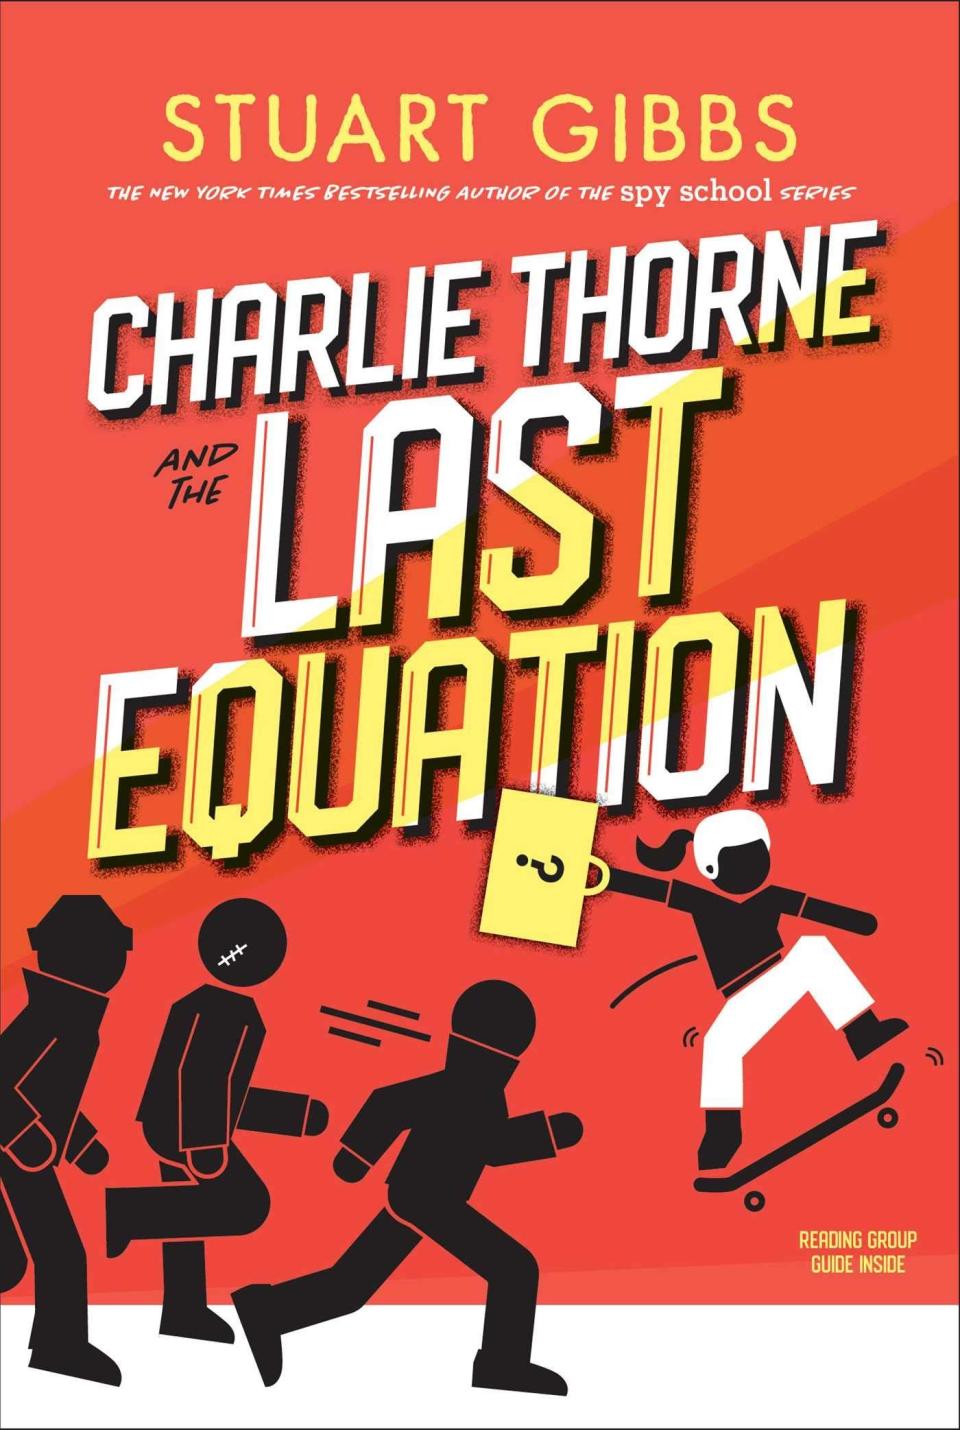 "Charlie Thorne and the Last Equation"